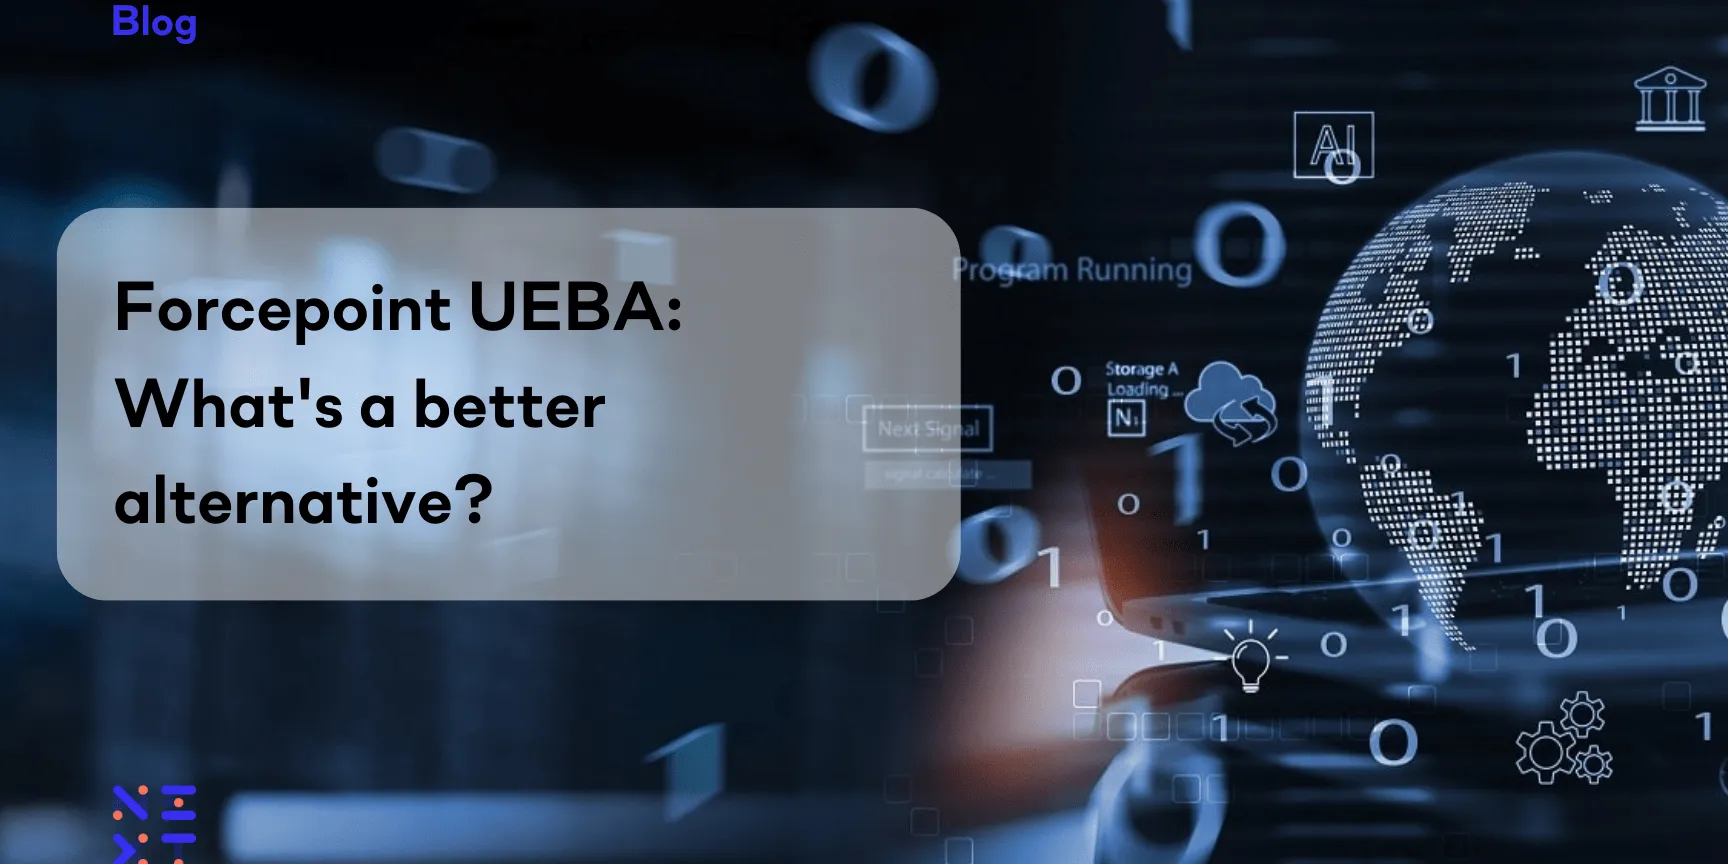 Forcepoint UEBA: What's a better alternative?